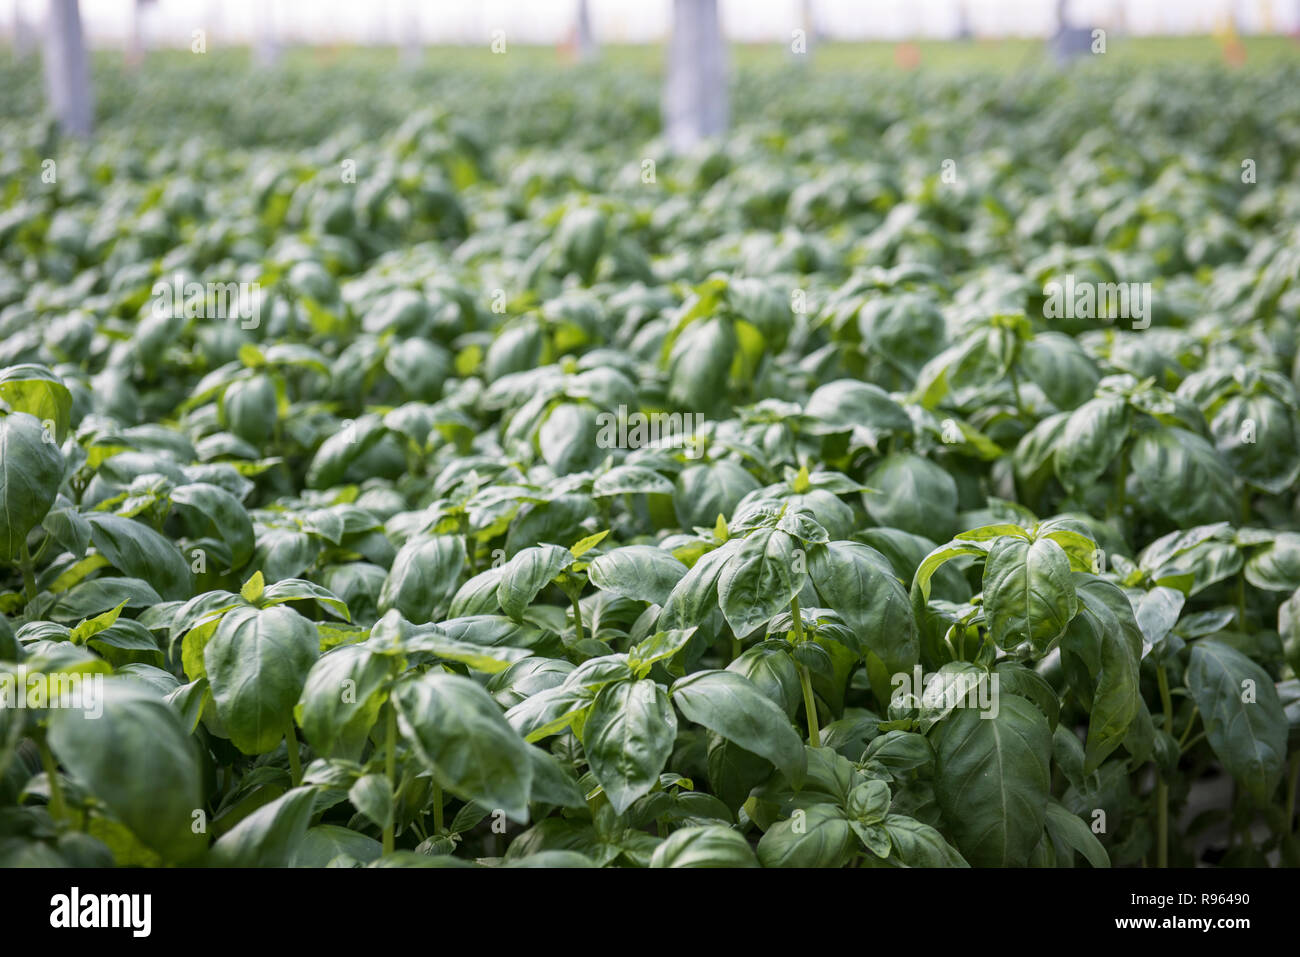 Image of lush green cabbage vegetation inside a Greenhouse farm. The cabbage plants look very fresh and is definitely well cared of. Stock Photo